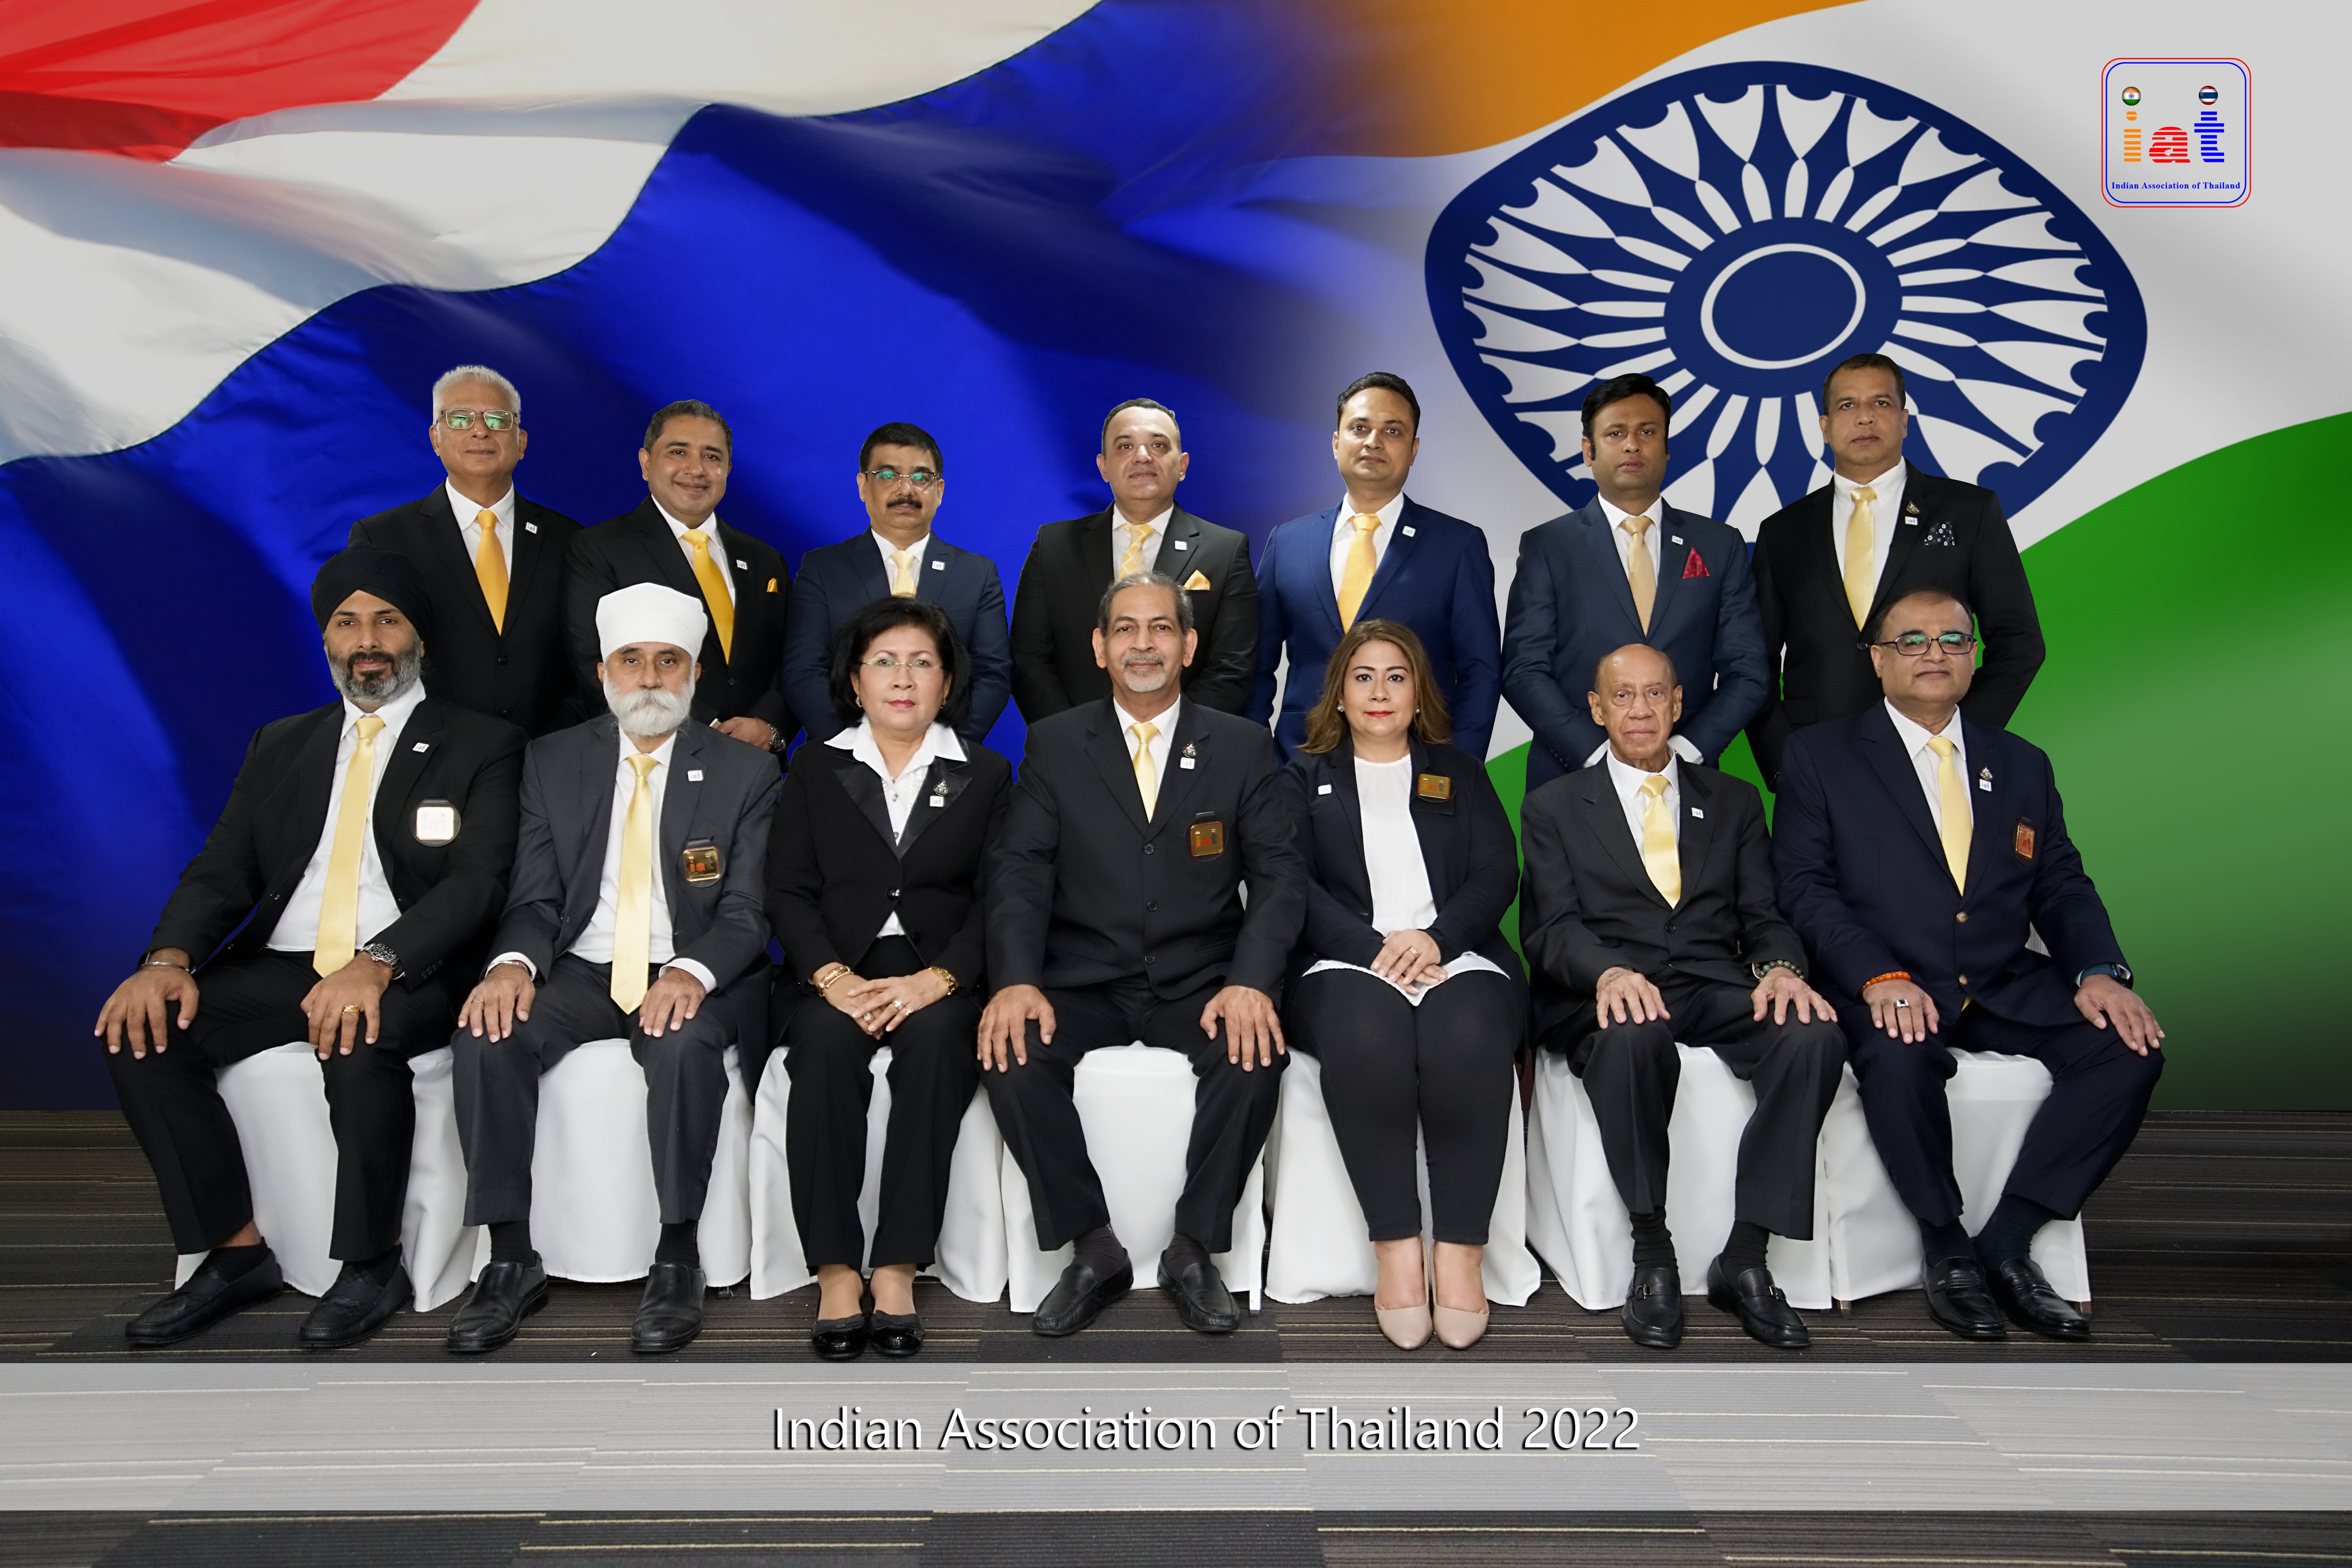 Indian Association of Thailand Committee 2022